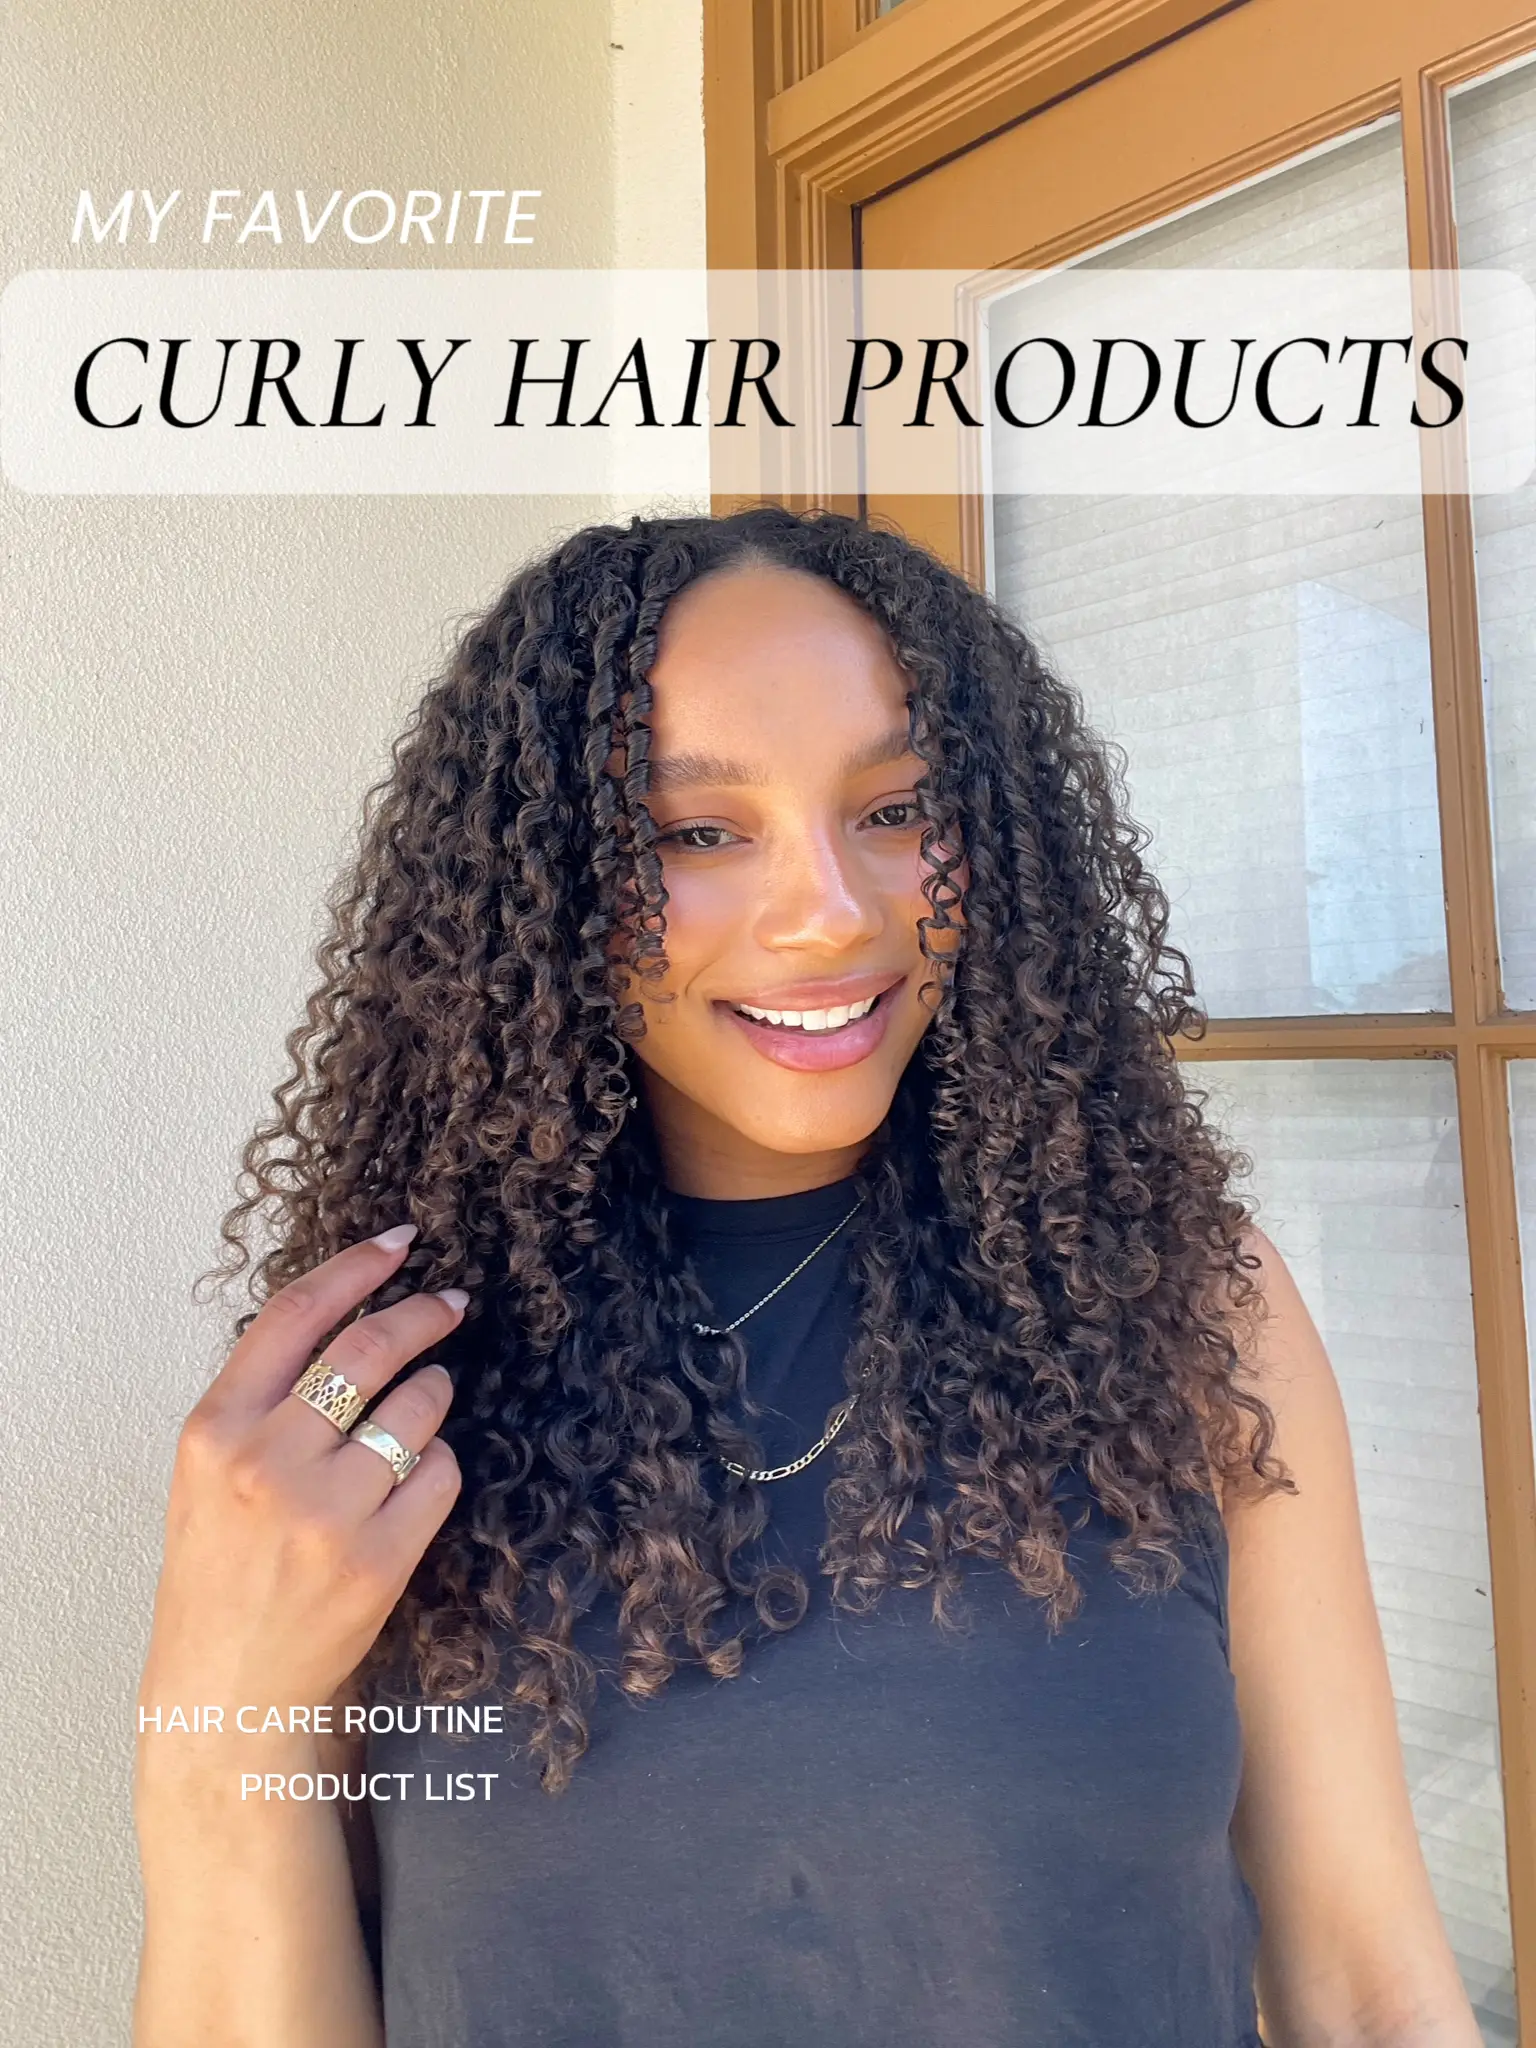 How To Scrunch Your Hair For Defined Curls - Carol's Daughter